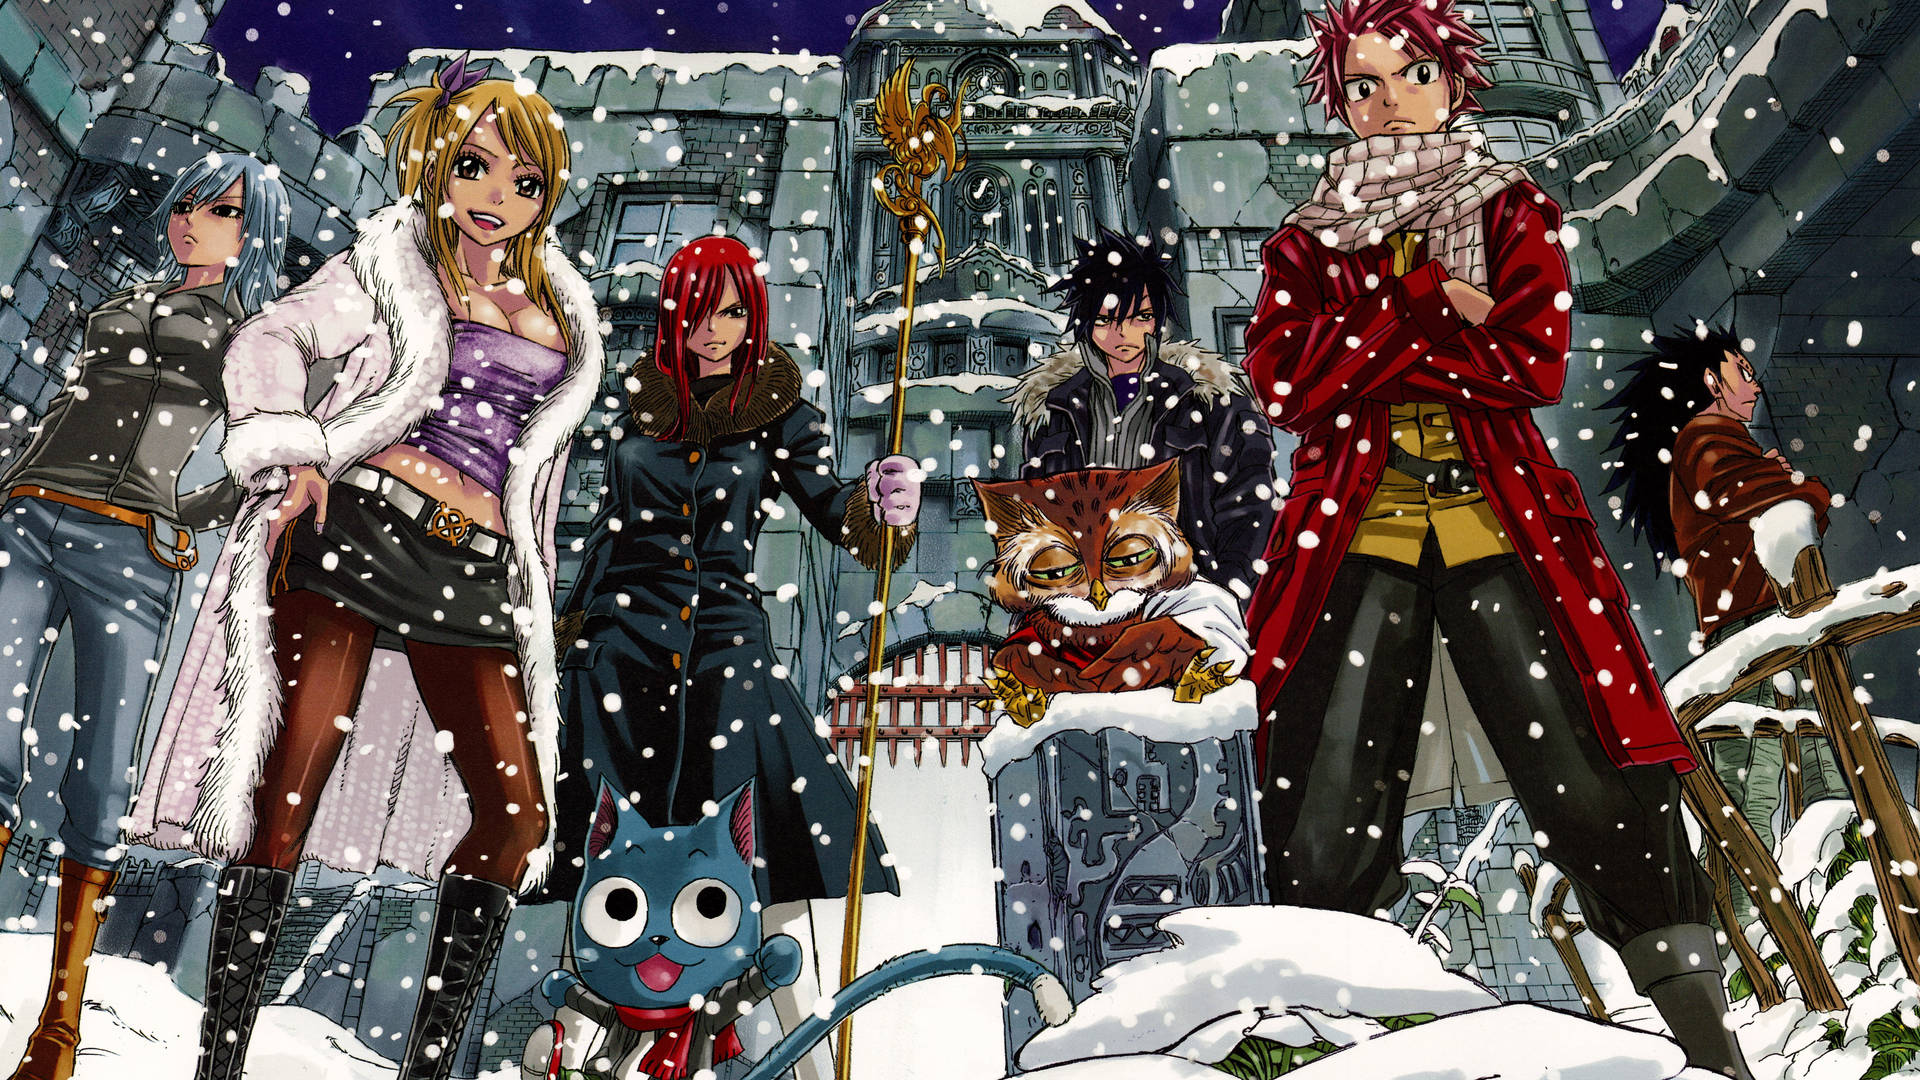 Fairy Tail Characters Winter Scene Wallpaper